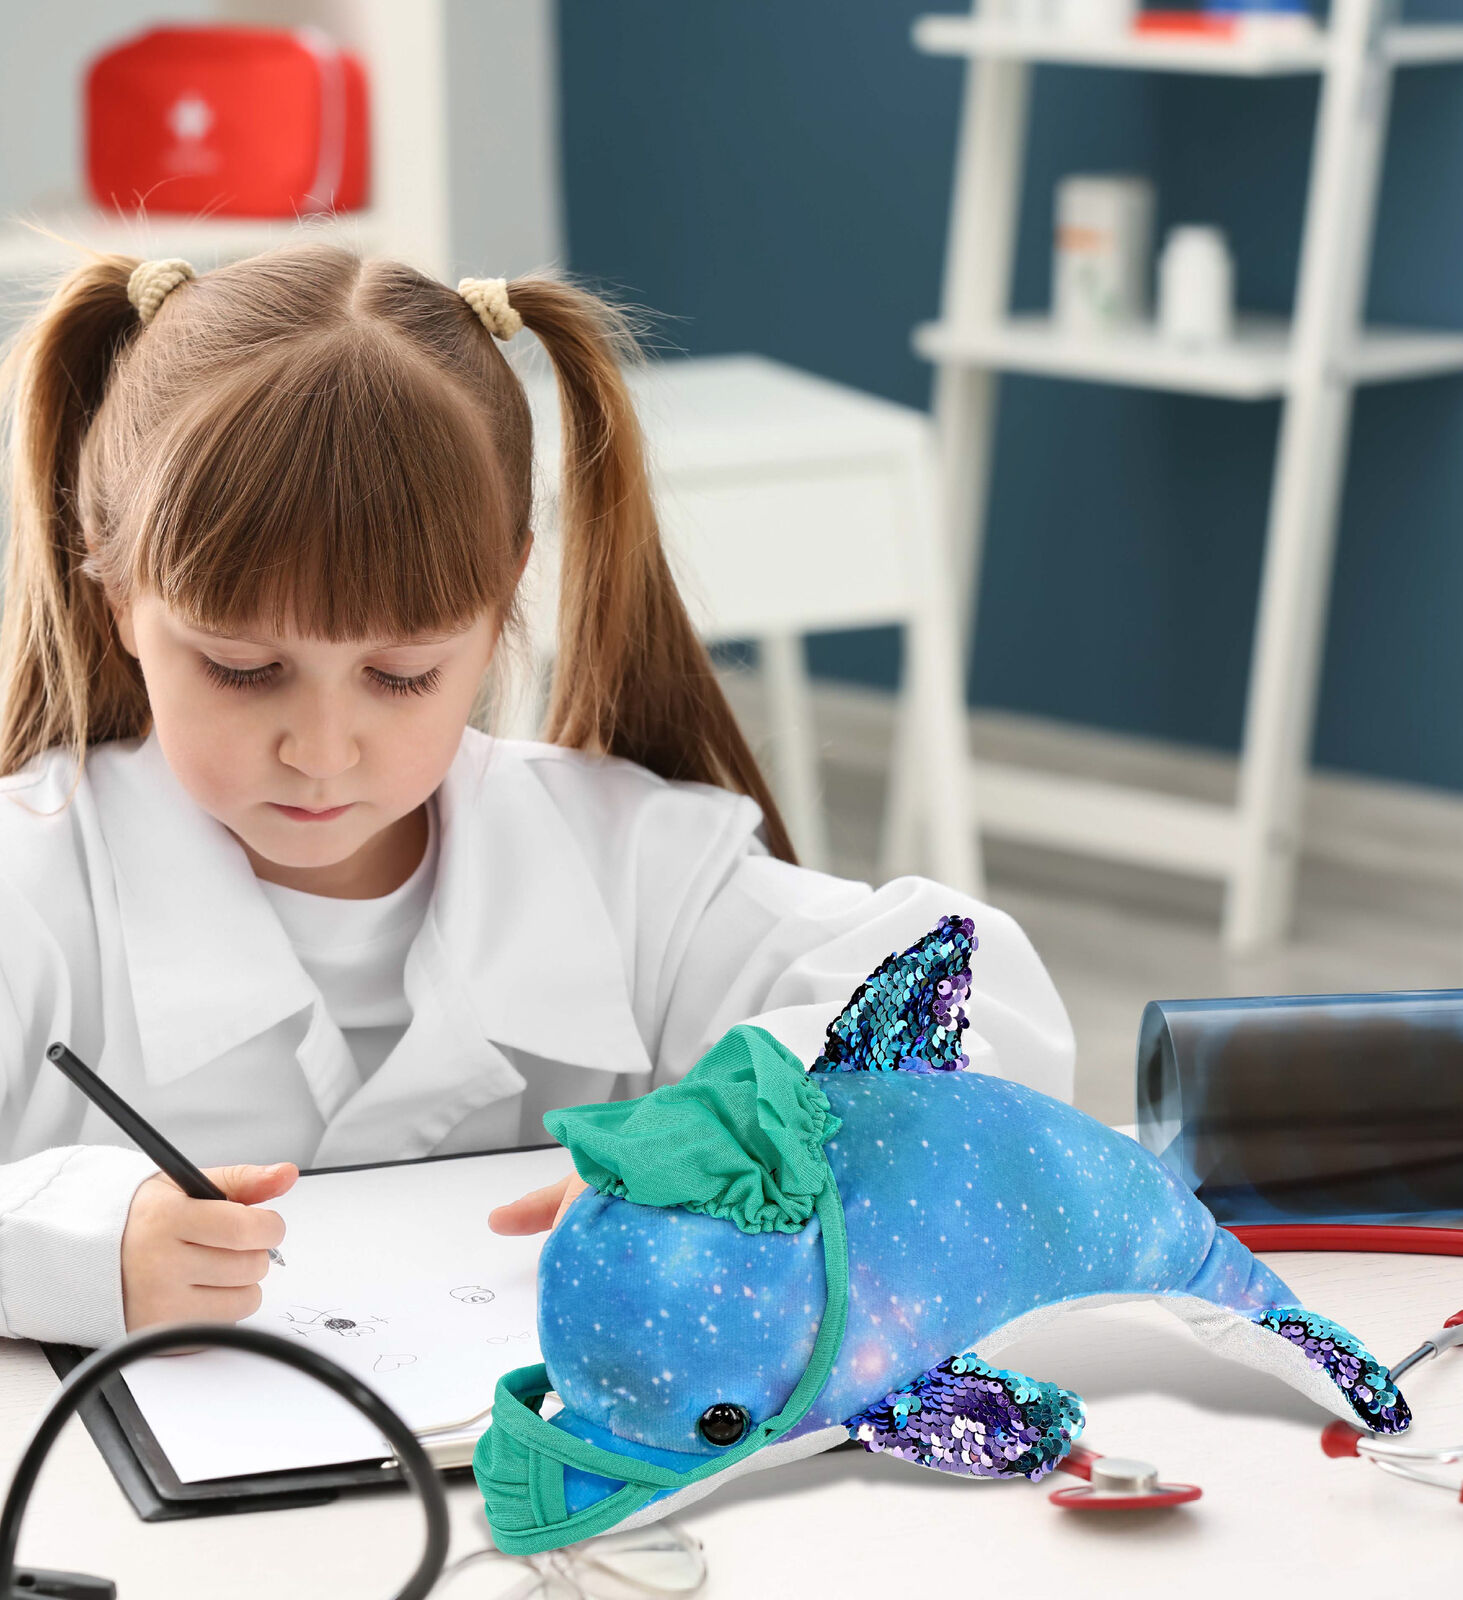 thinkstar Space Sequin Dolphin Doctor Plush With Scrub Uniform And Cap - 12 Inch